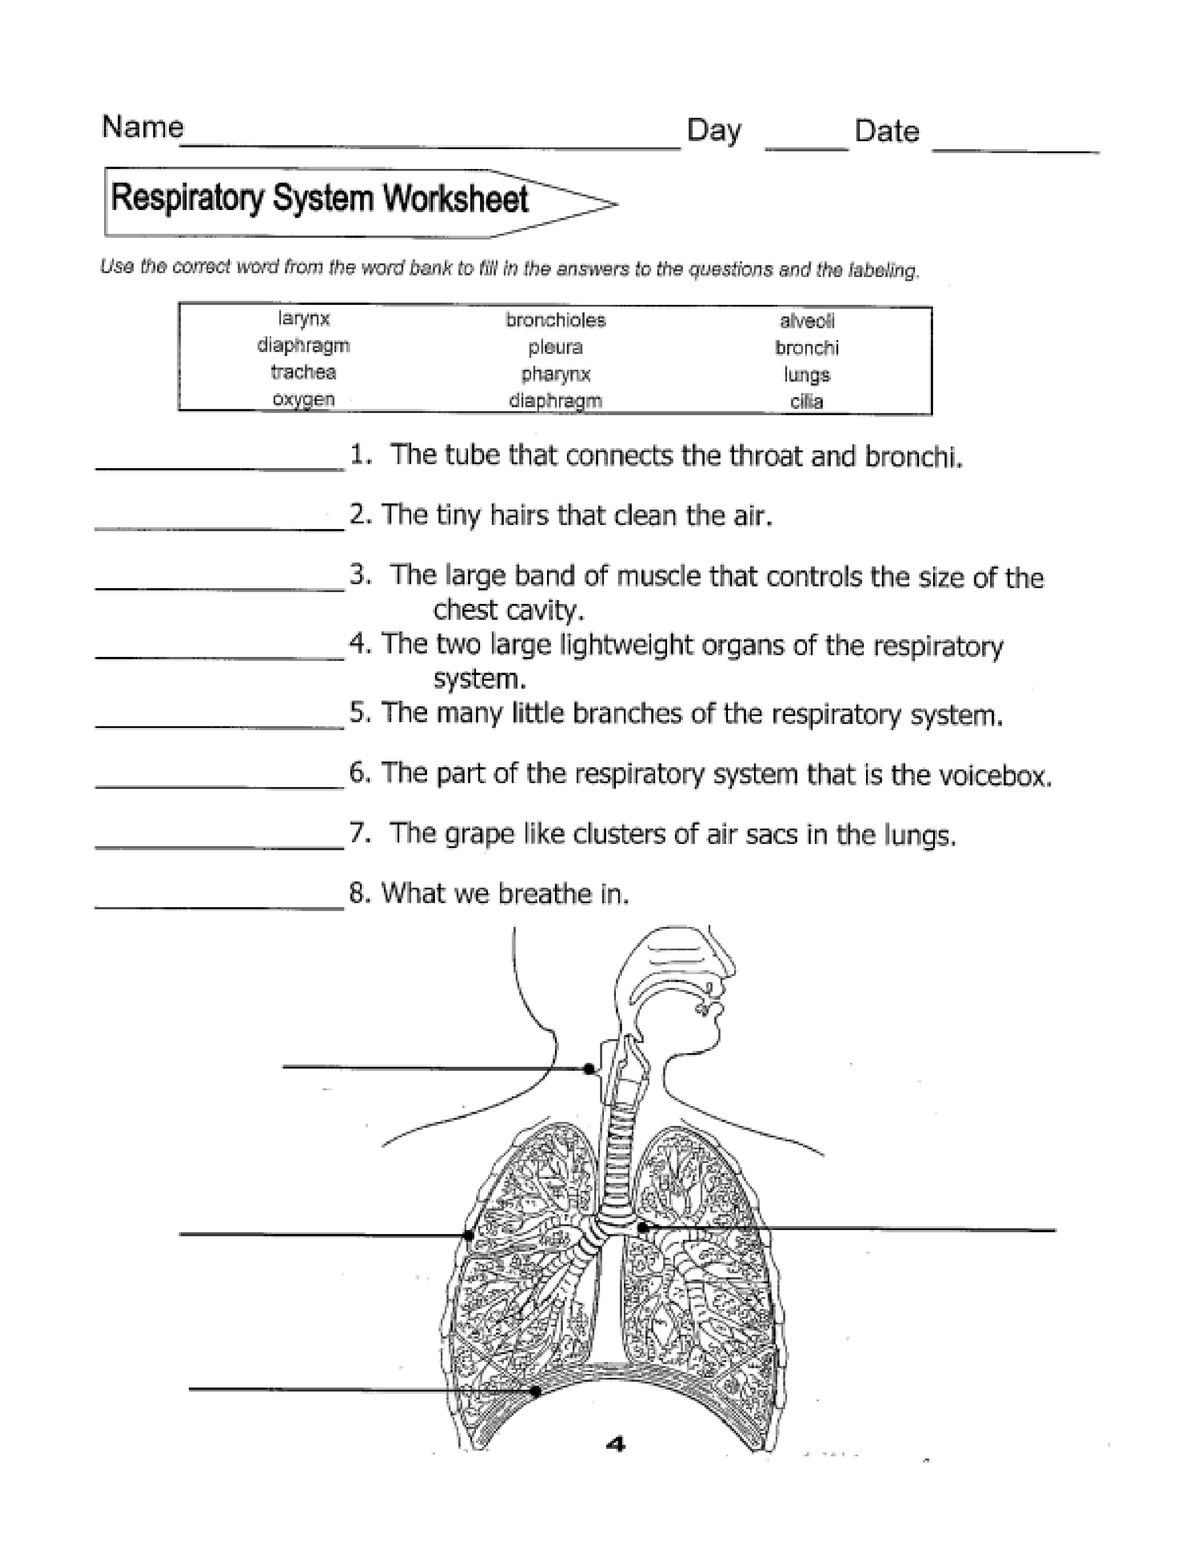 the respiratory system worksheet education.com